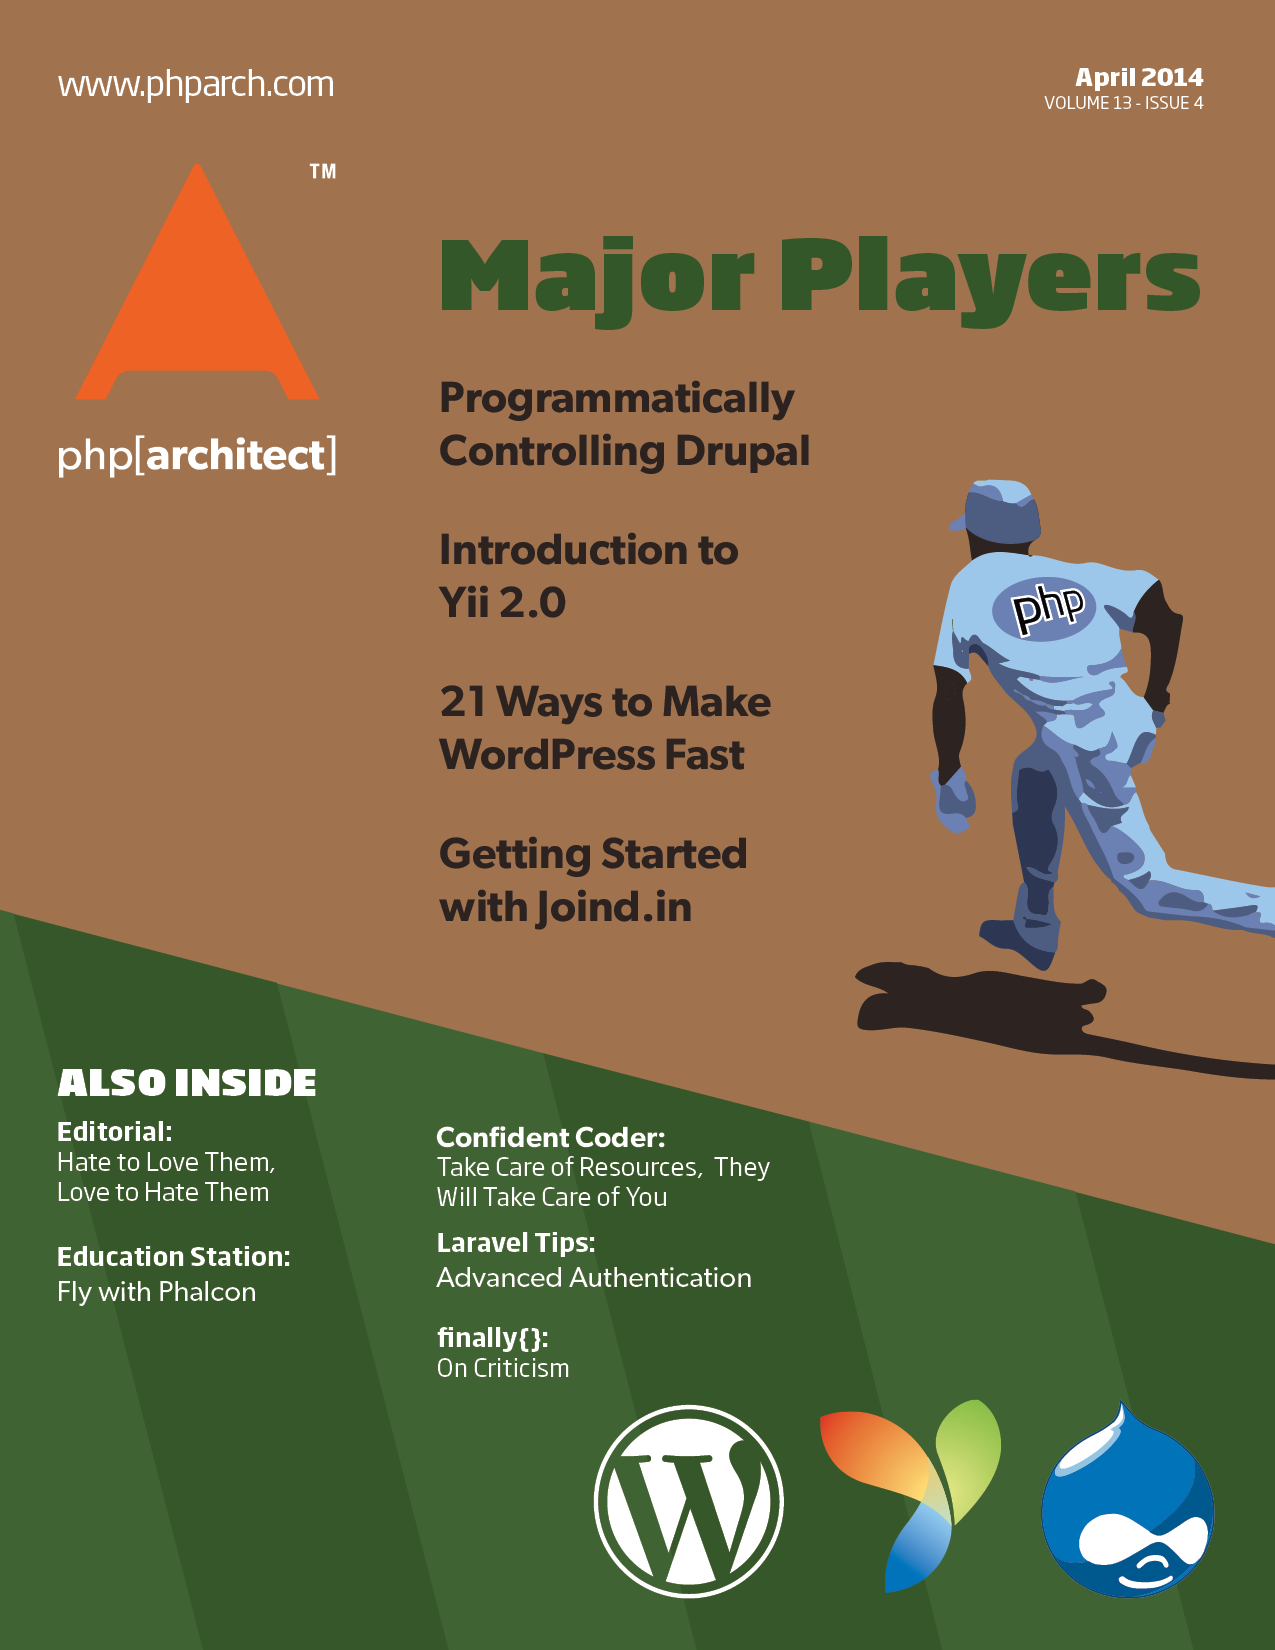 php[architect] April 2014 - Major Players